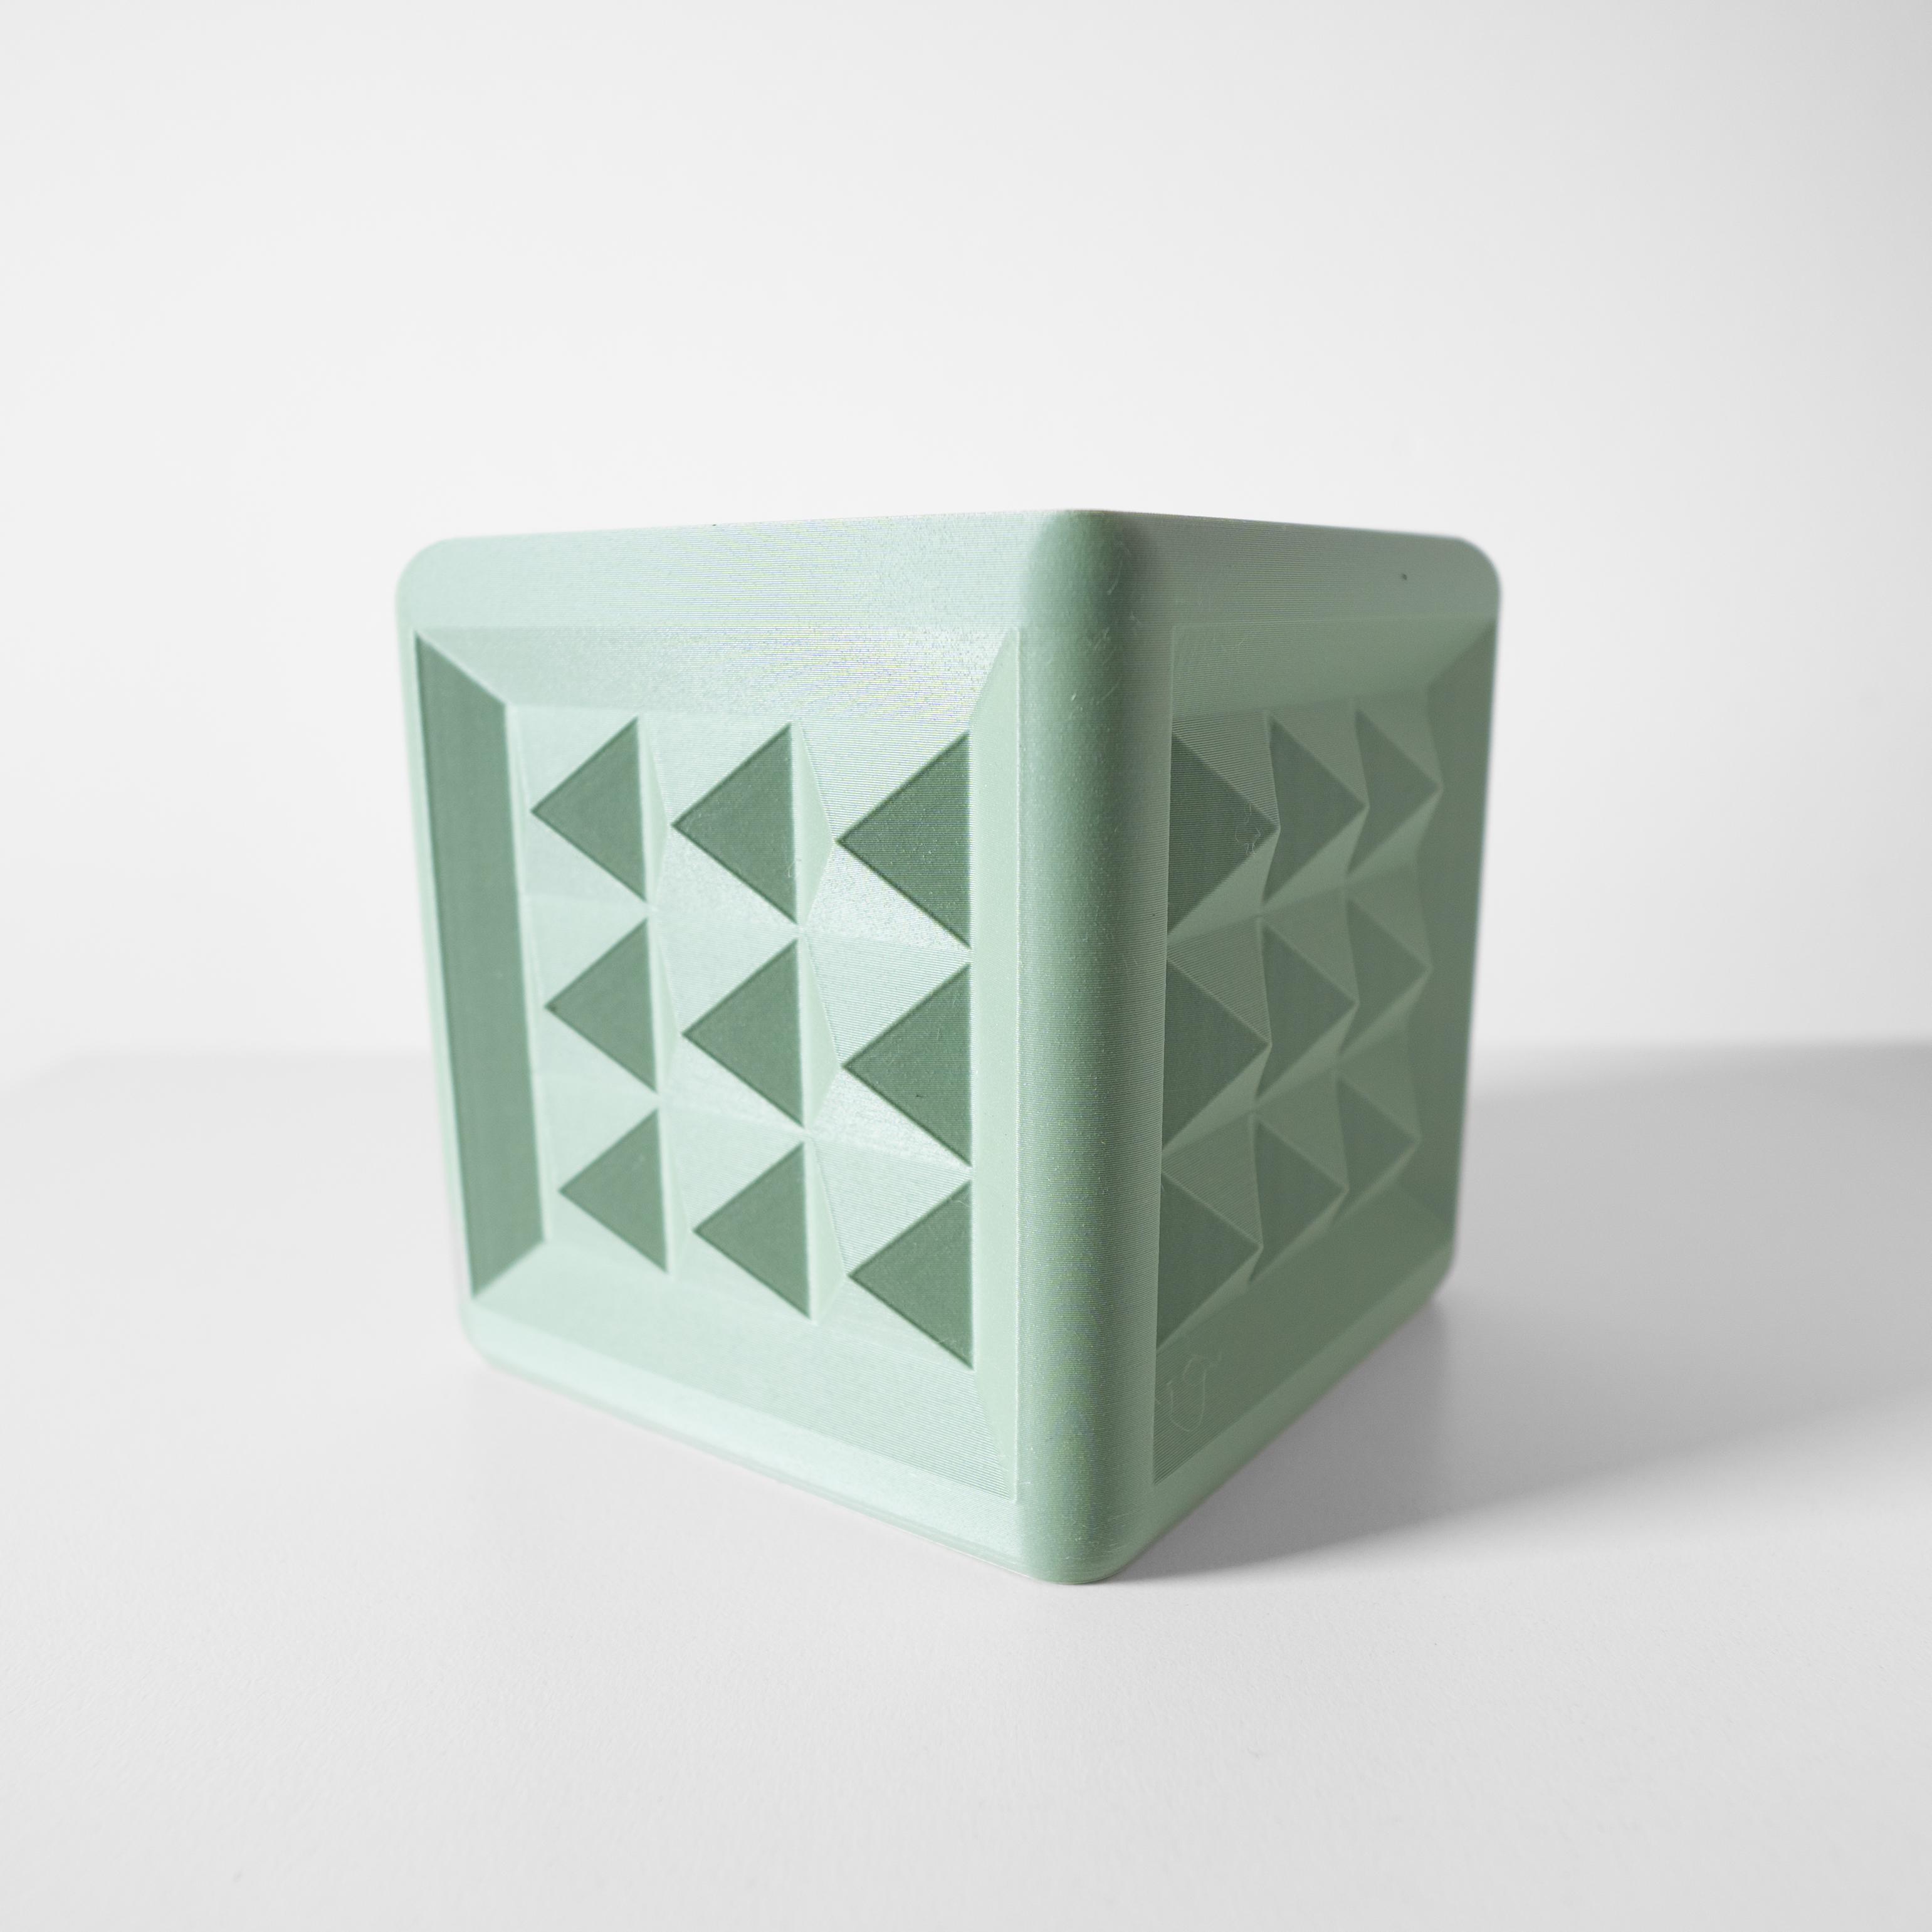 The Novo Square Planter Pot with Drainage Tray: Modern and Unique Home Decor for Plants 3d model